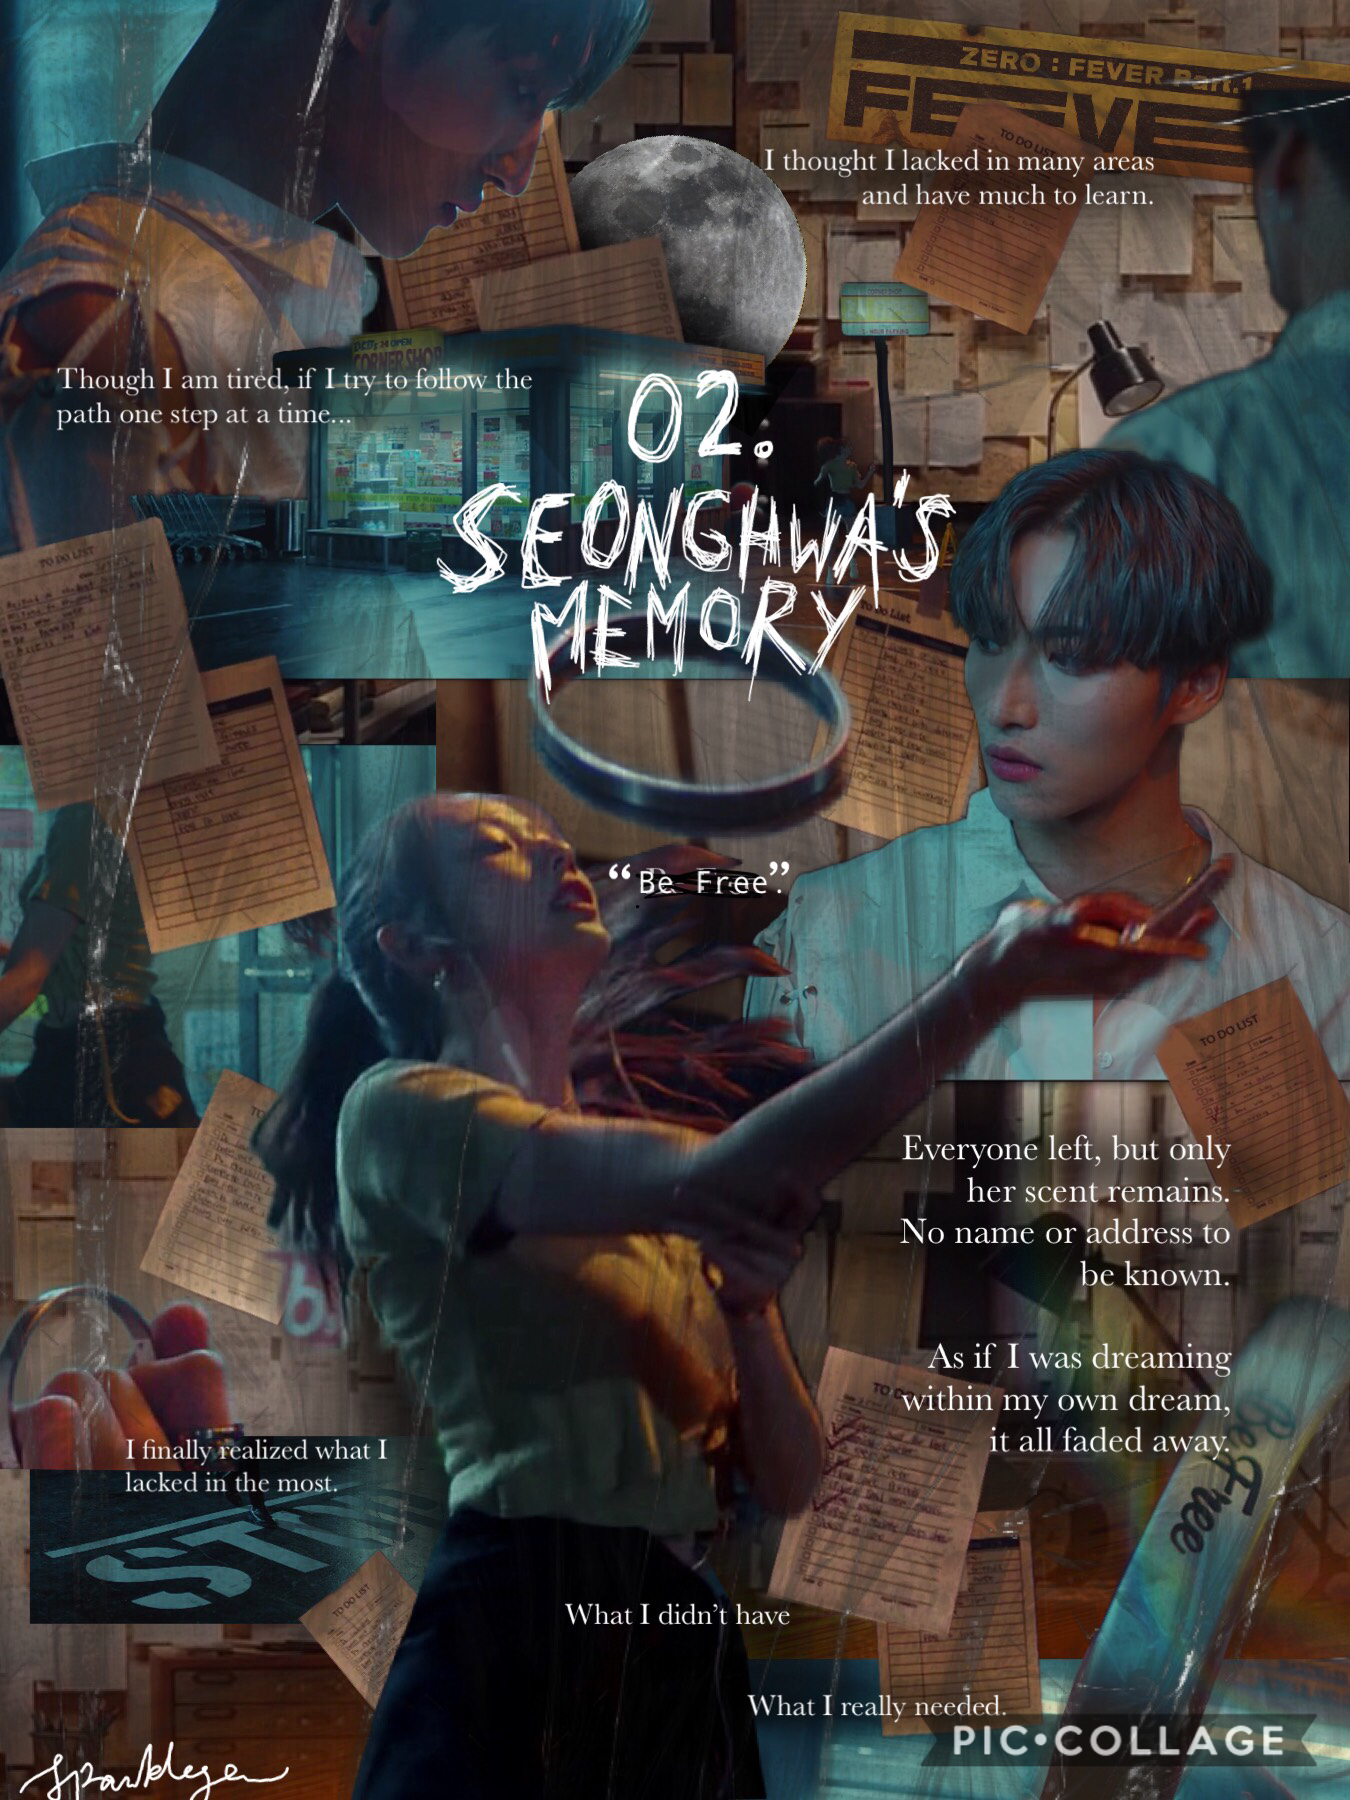 [3/10] 02. “Seonghwa’s Memory” | 1 of SH’s to-do tasks was to “fall in love”. the girl must have been a symbol of freedom to him from his burdens. But eventually she left like everyone else